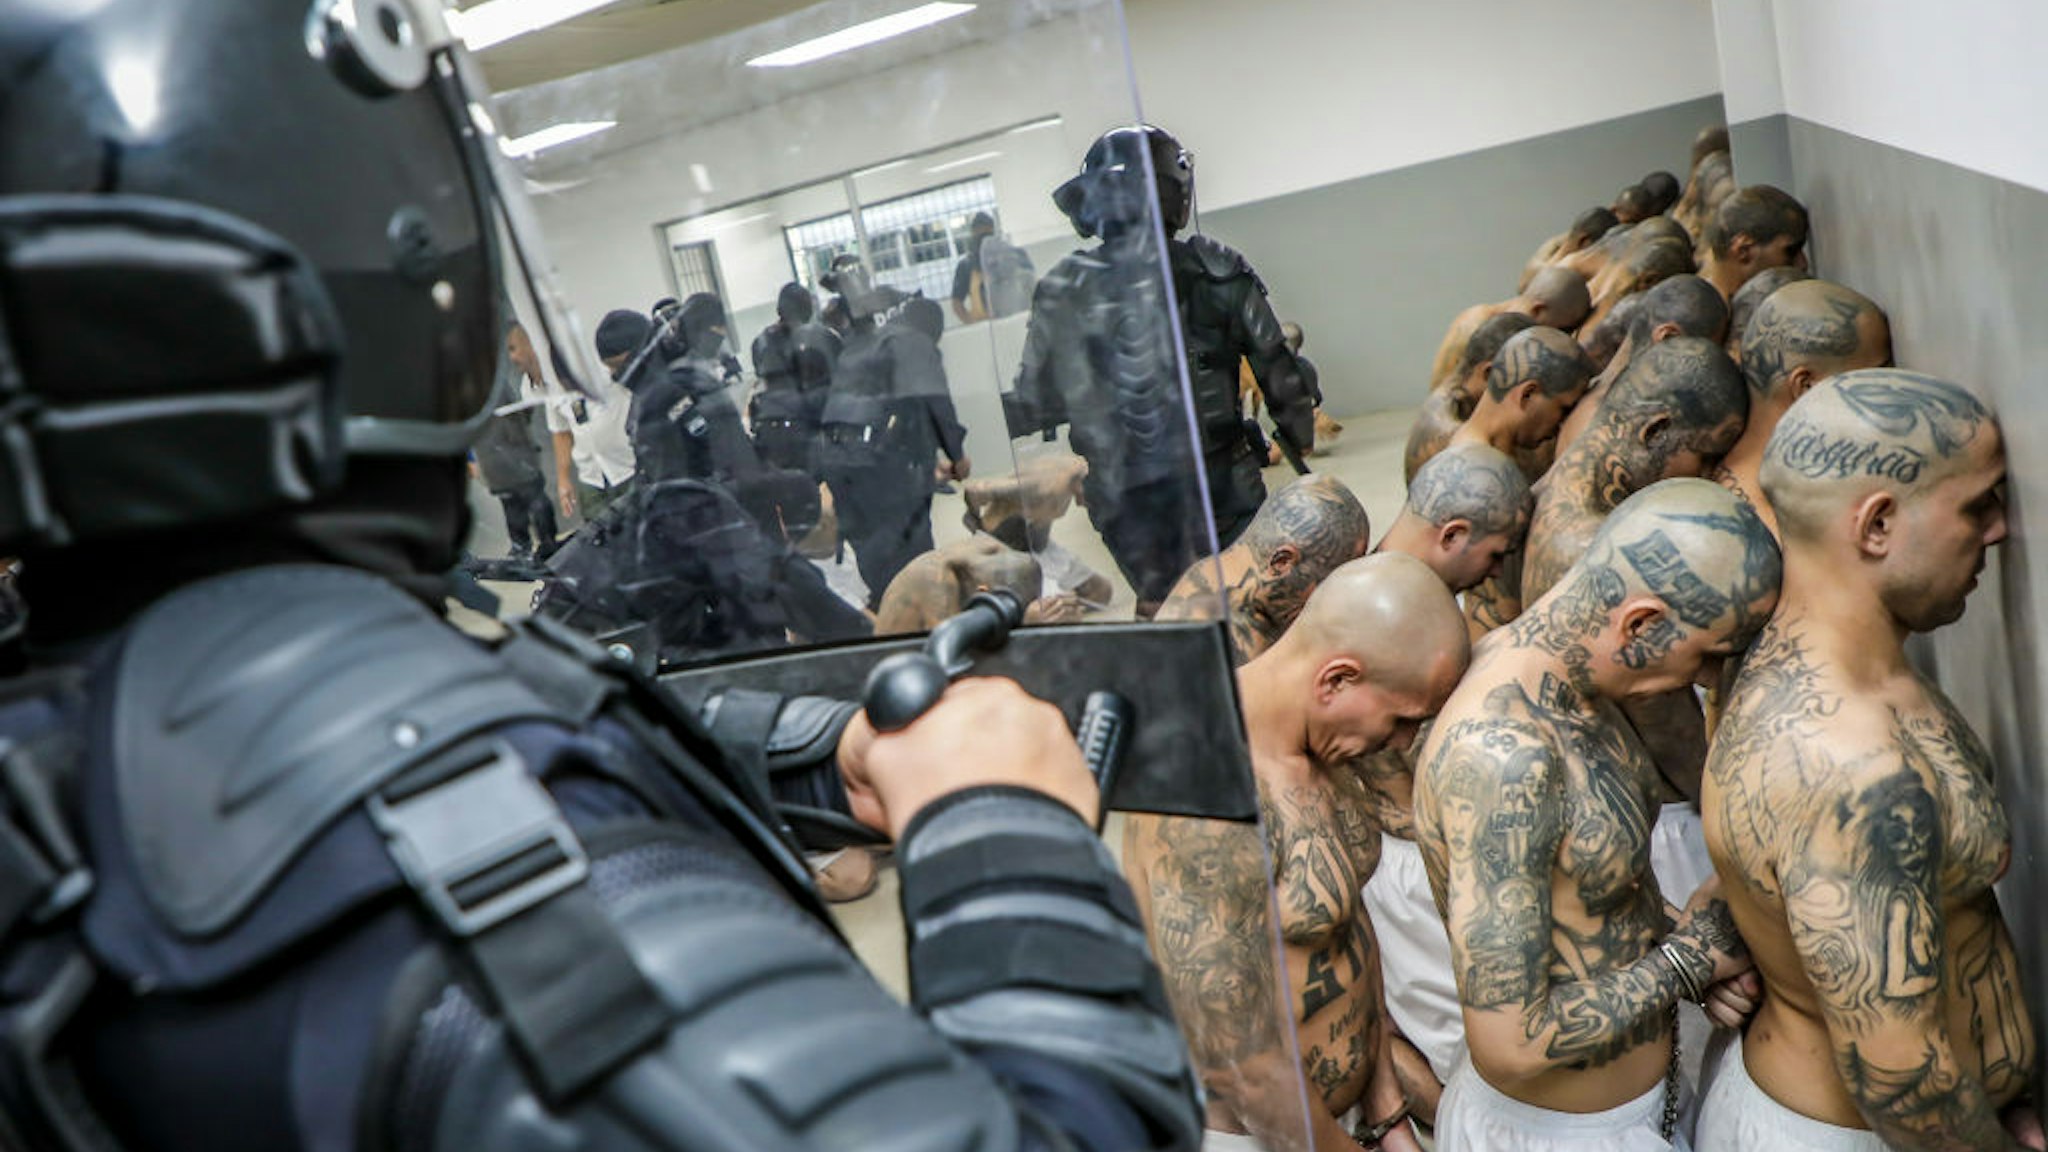 TECOLUCA, EL SALVADOR - FEBRUARY 24: A first group of 2,000 detainees are moved to the mega- prison Terrorist Confinement Centre (CECOT) on February 24, 2023 in Tecoluca, El Salvador. Since president Nayib Bukele announced state of exception in March 2022, over 62,000 suspected gang members have been arrested. Human Rights organizations denounce abuses and due process violations. El Salvador has one of highest crime rates in Latin America. (Photo by Presidencia El Salvador via Getty Images )